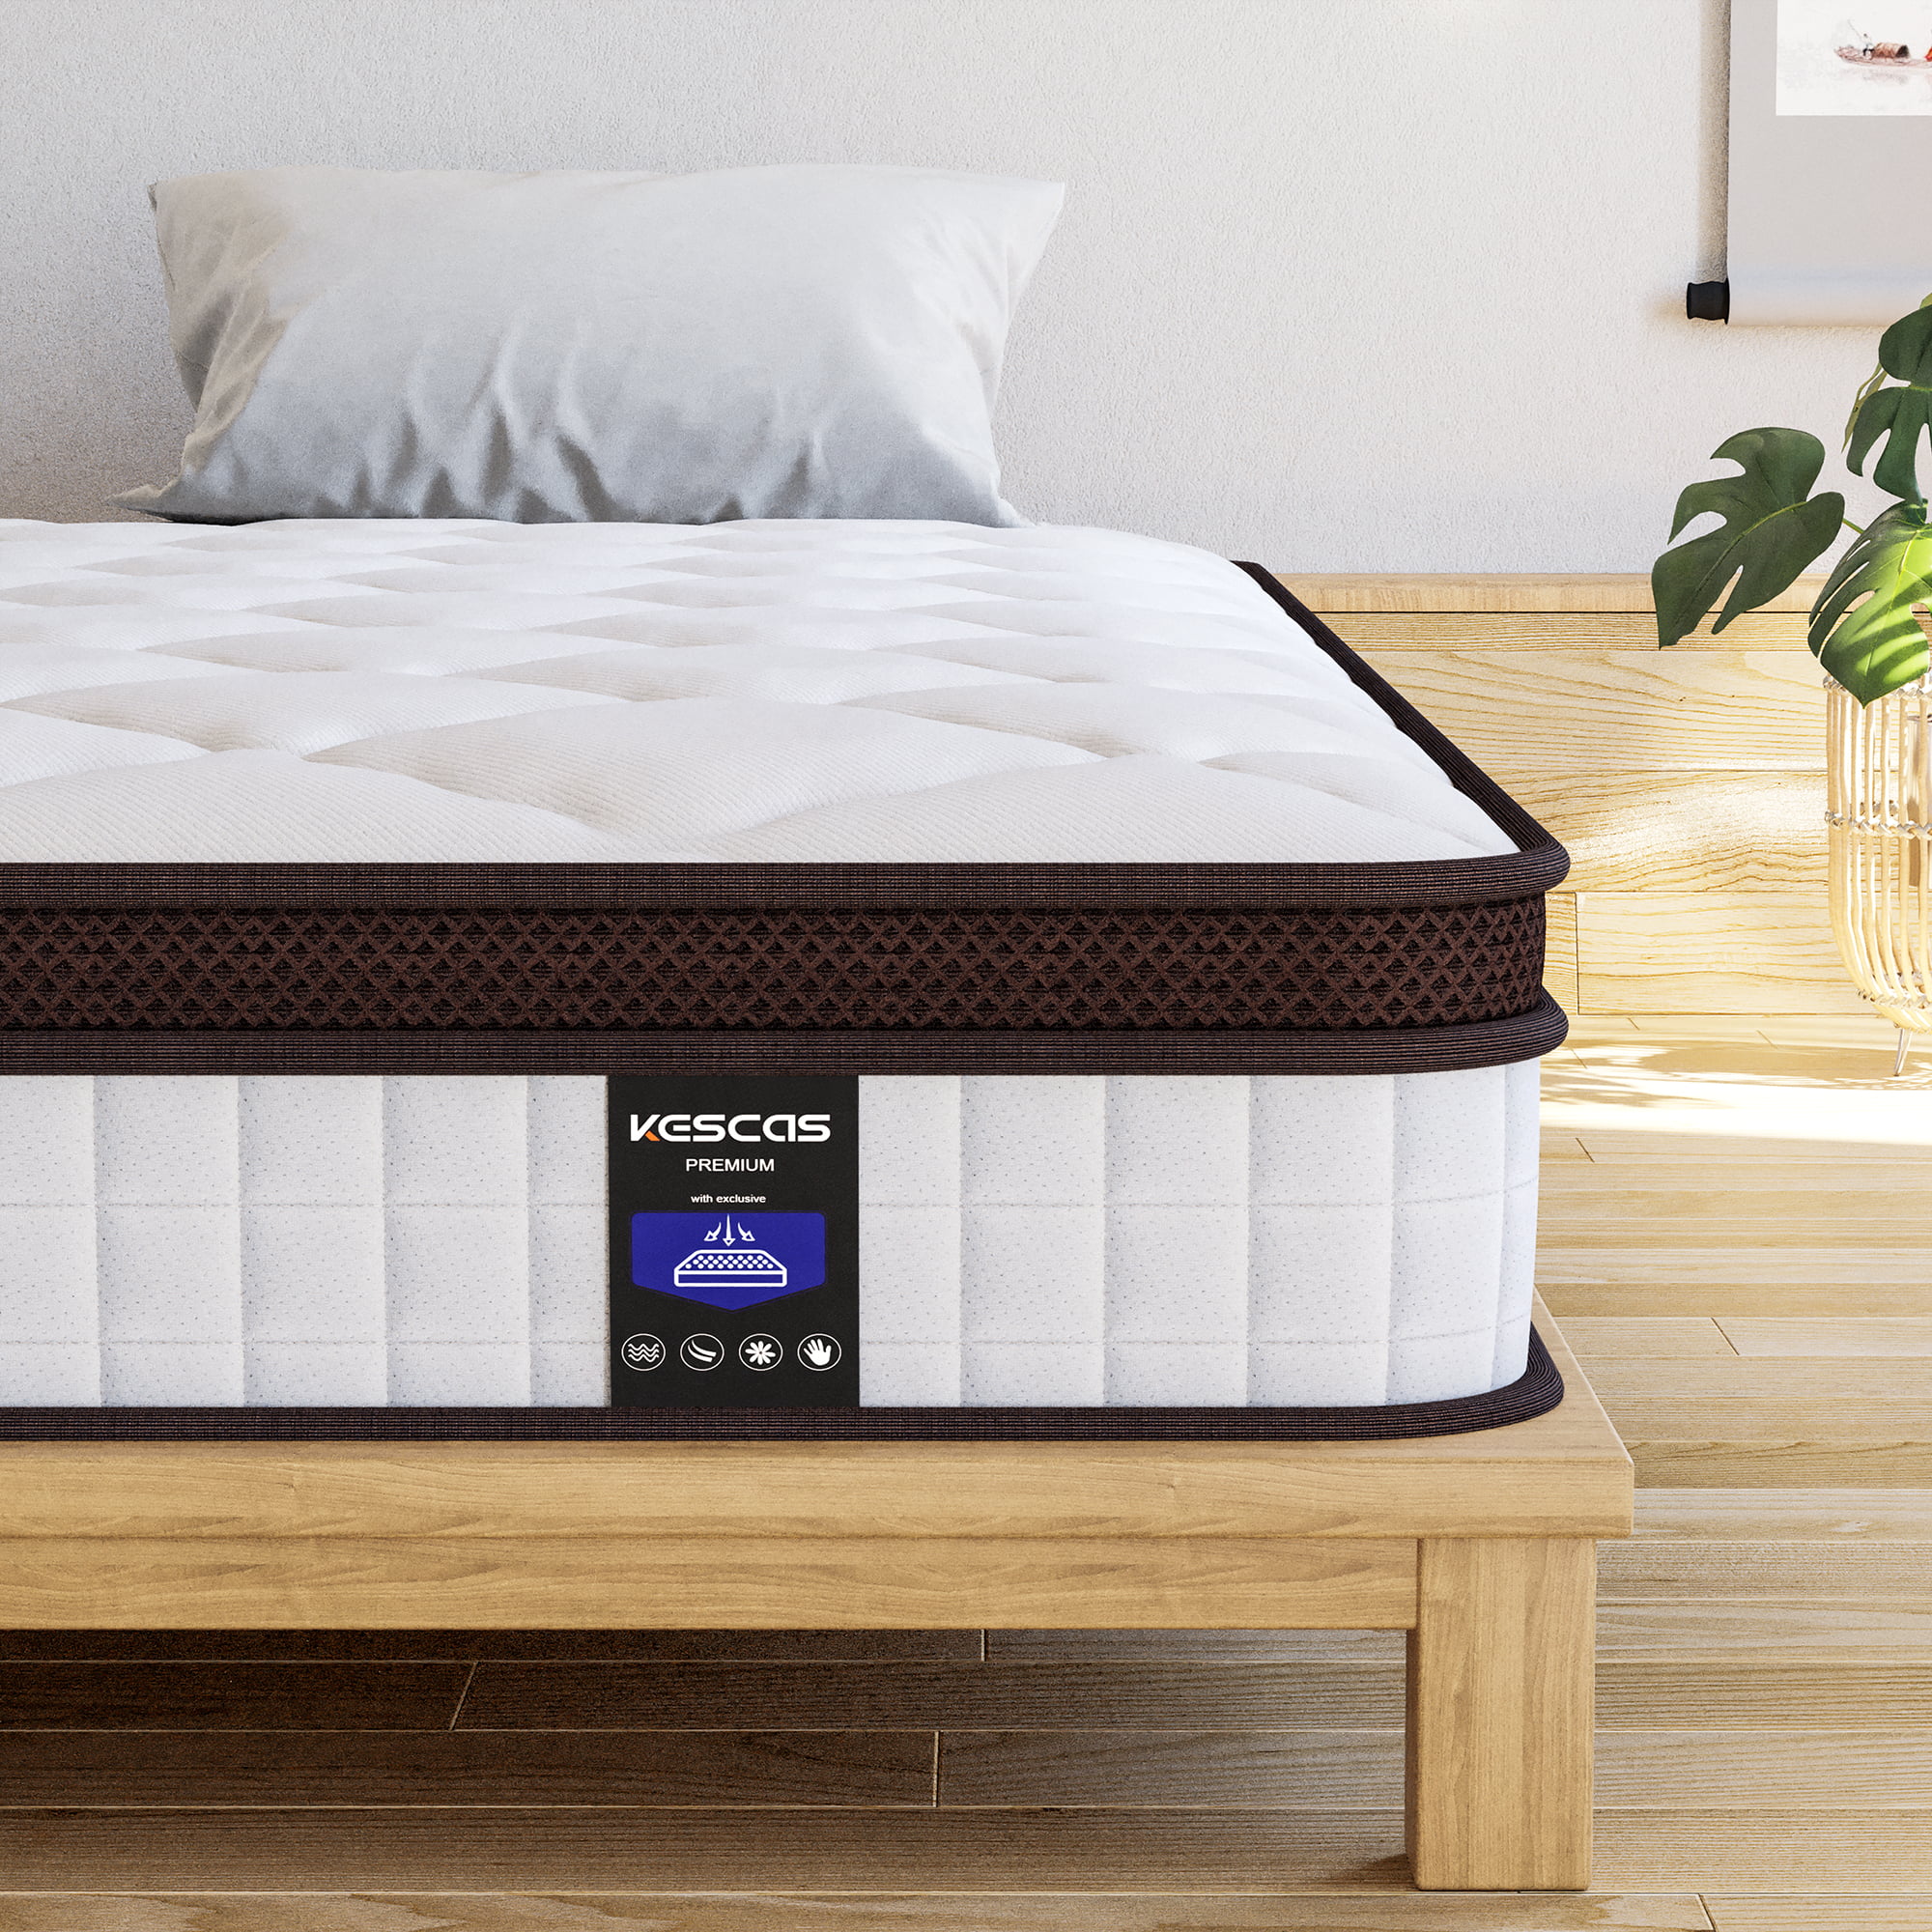 Designed to Improve Back Pain Relief and Deep Sleep 100 Nights Trial 10 Years Support Medium Firm Mattress in a Box Kescas 10 Inch Single Mattress Cool Breathable Memory Foam Hybrid 3FT Mattress 